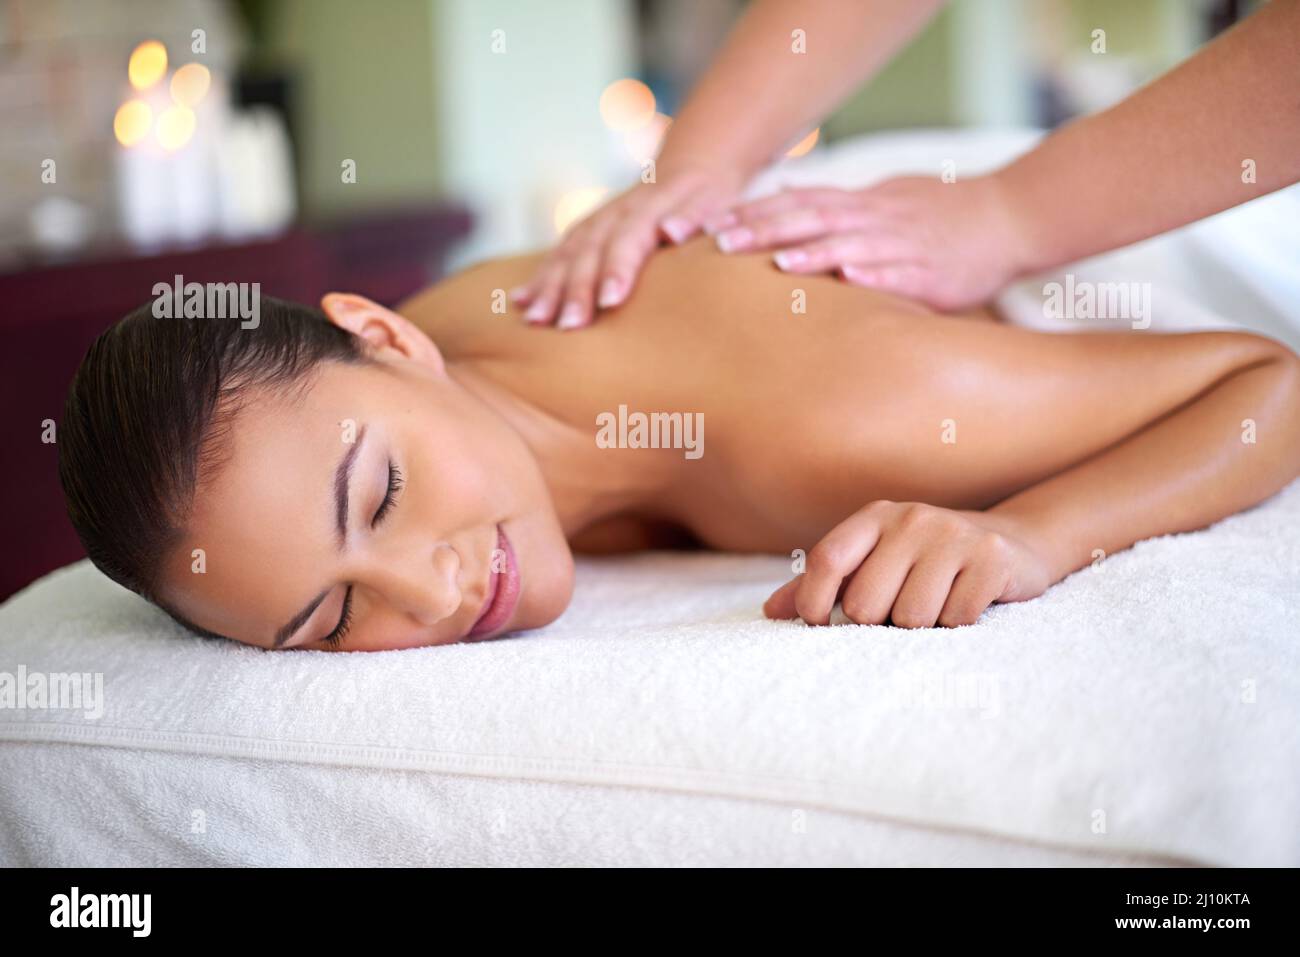 Fall into a relaxed, rejuvenated new you. Shot of a young woman enjoying a back massage at a spa. Stock Photo